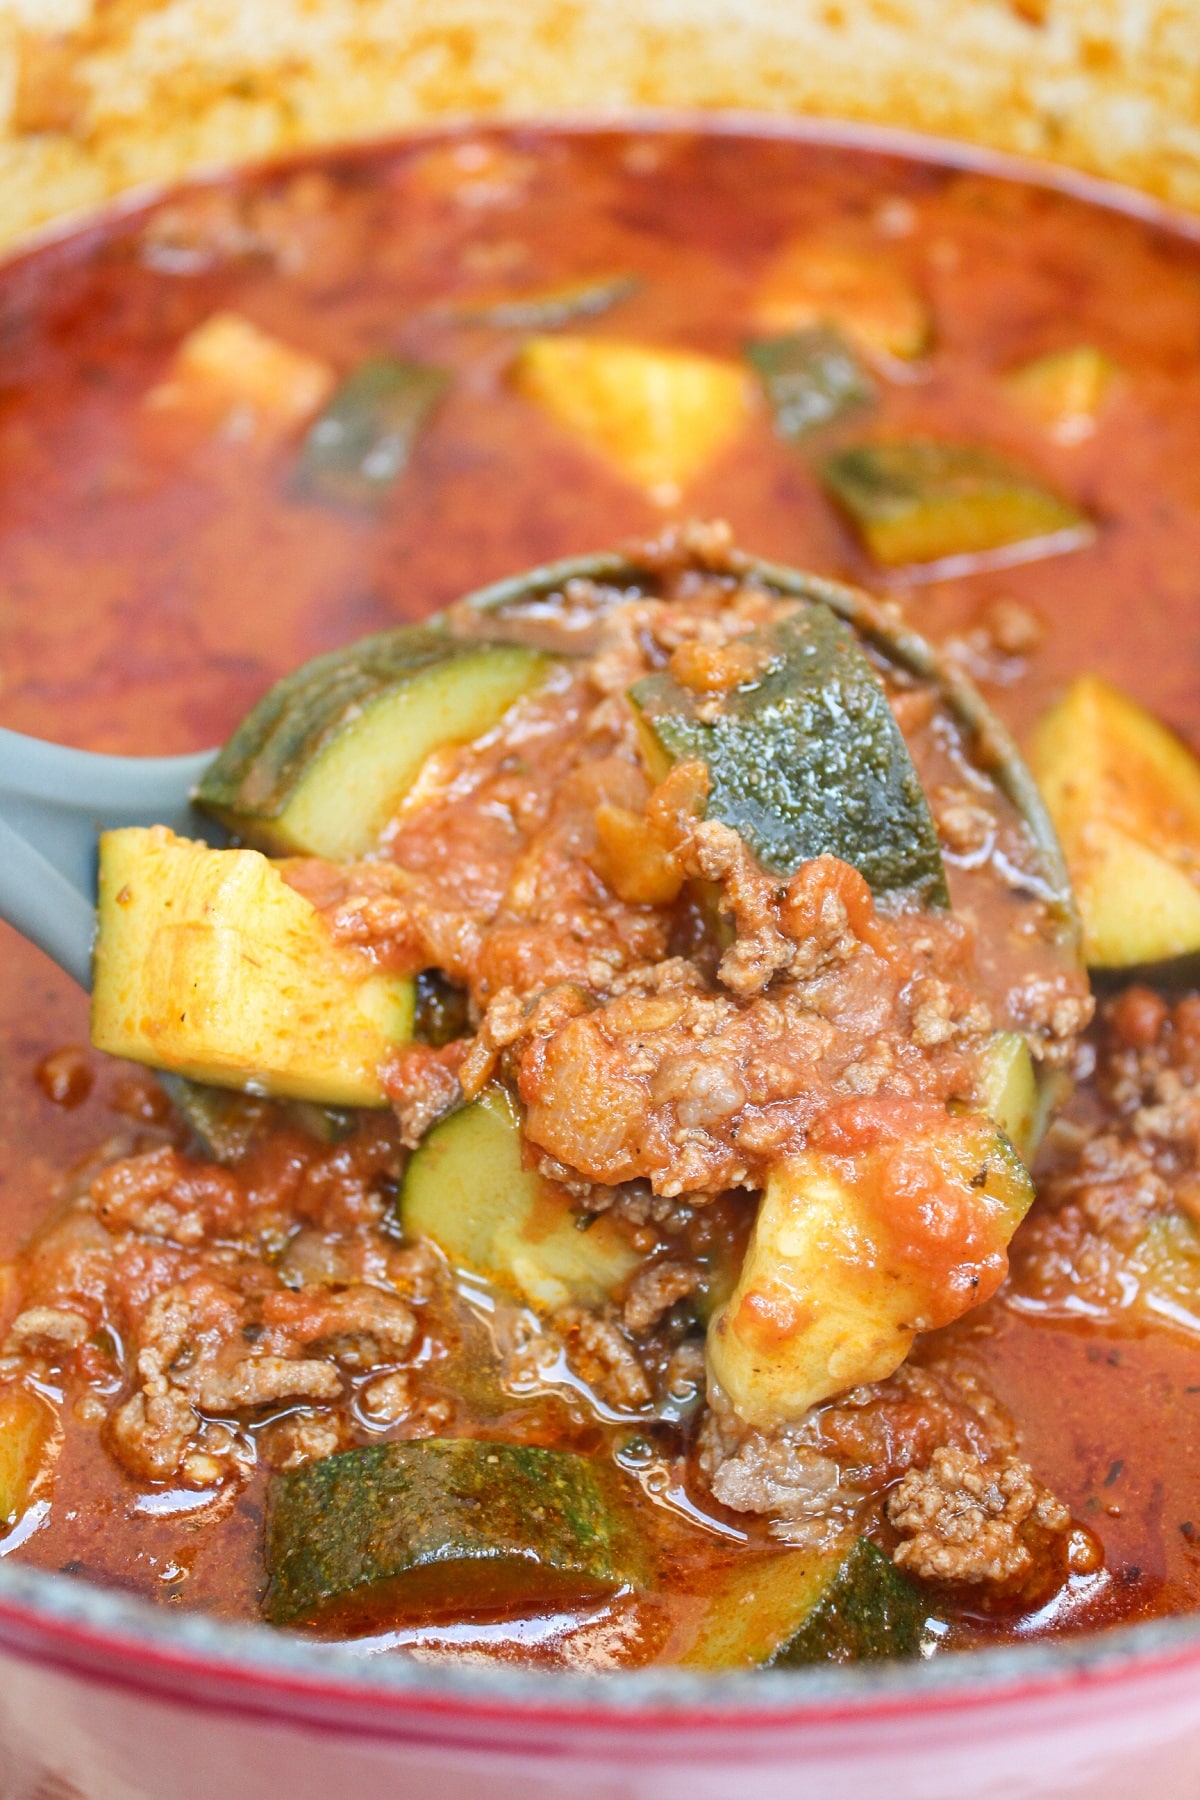 zucchini and hamburger stew ladled from a stew pot.